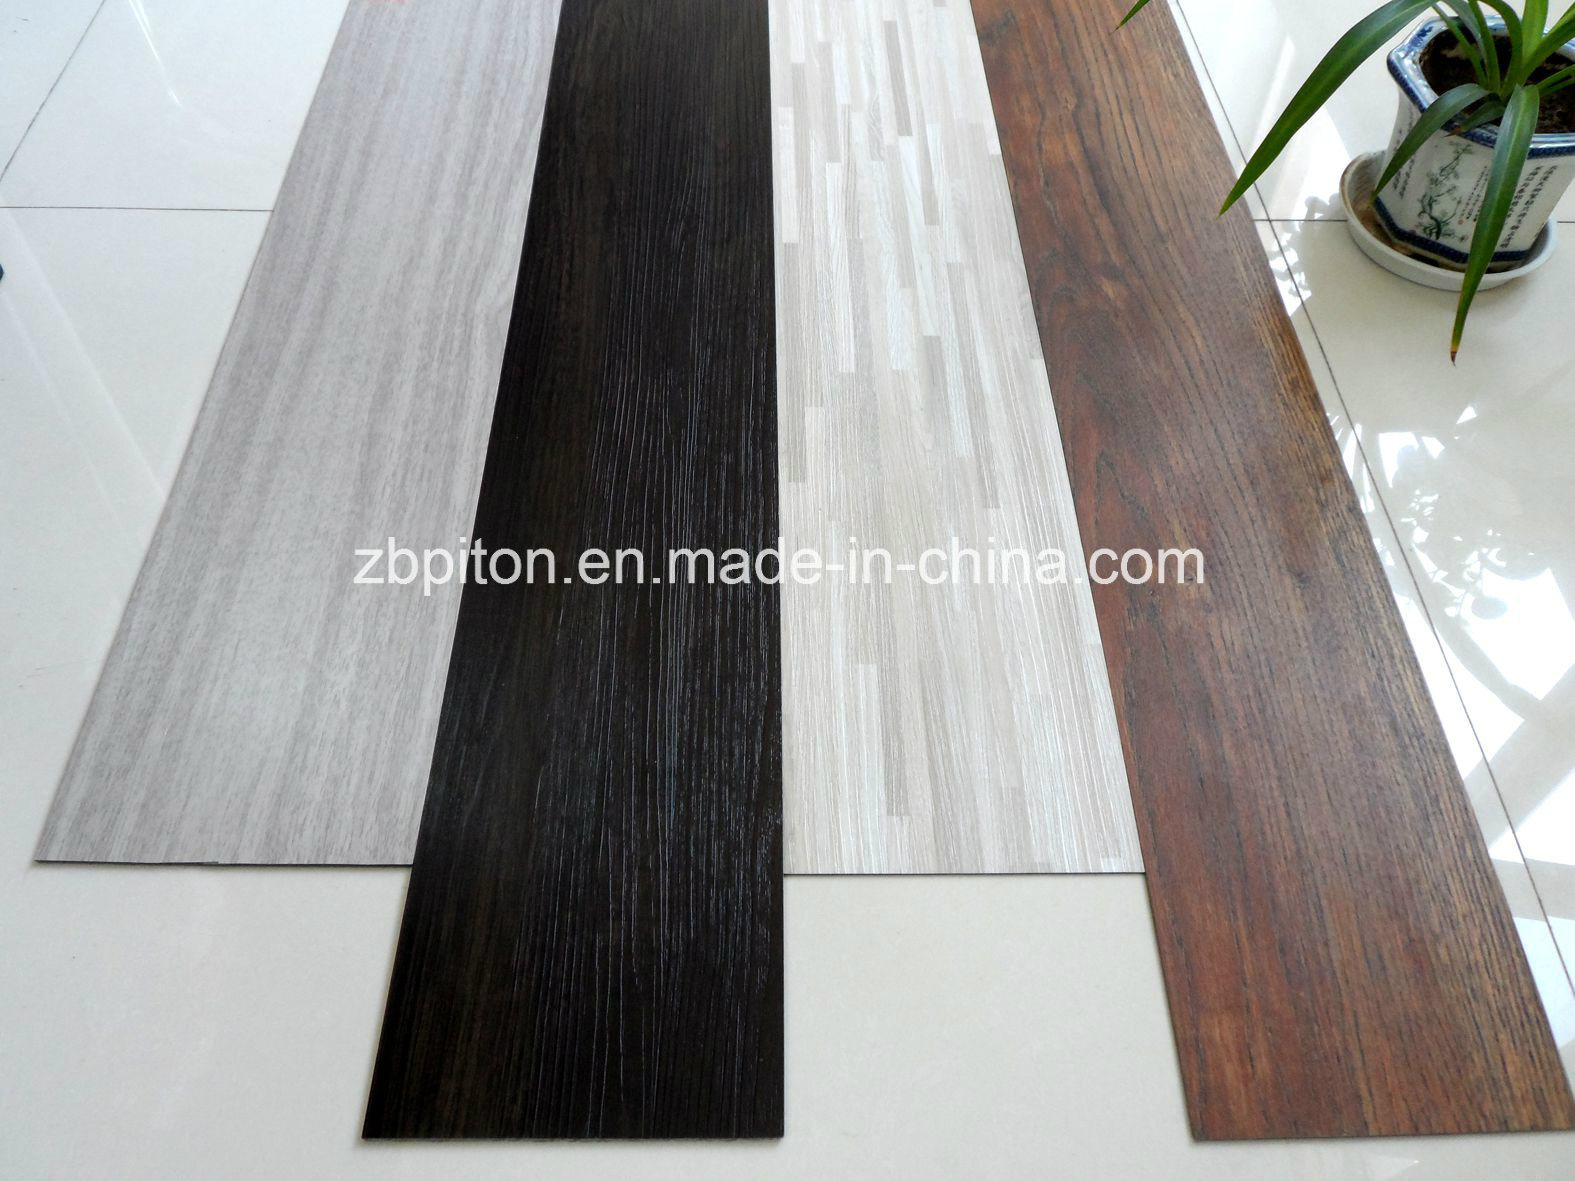 China PVC Flooring Vinyl Commercial and Residential Floor (CNG0402N)